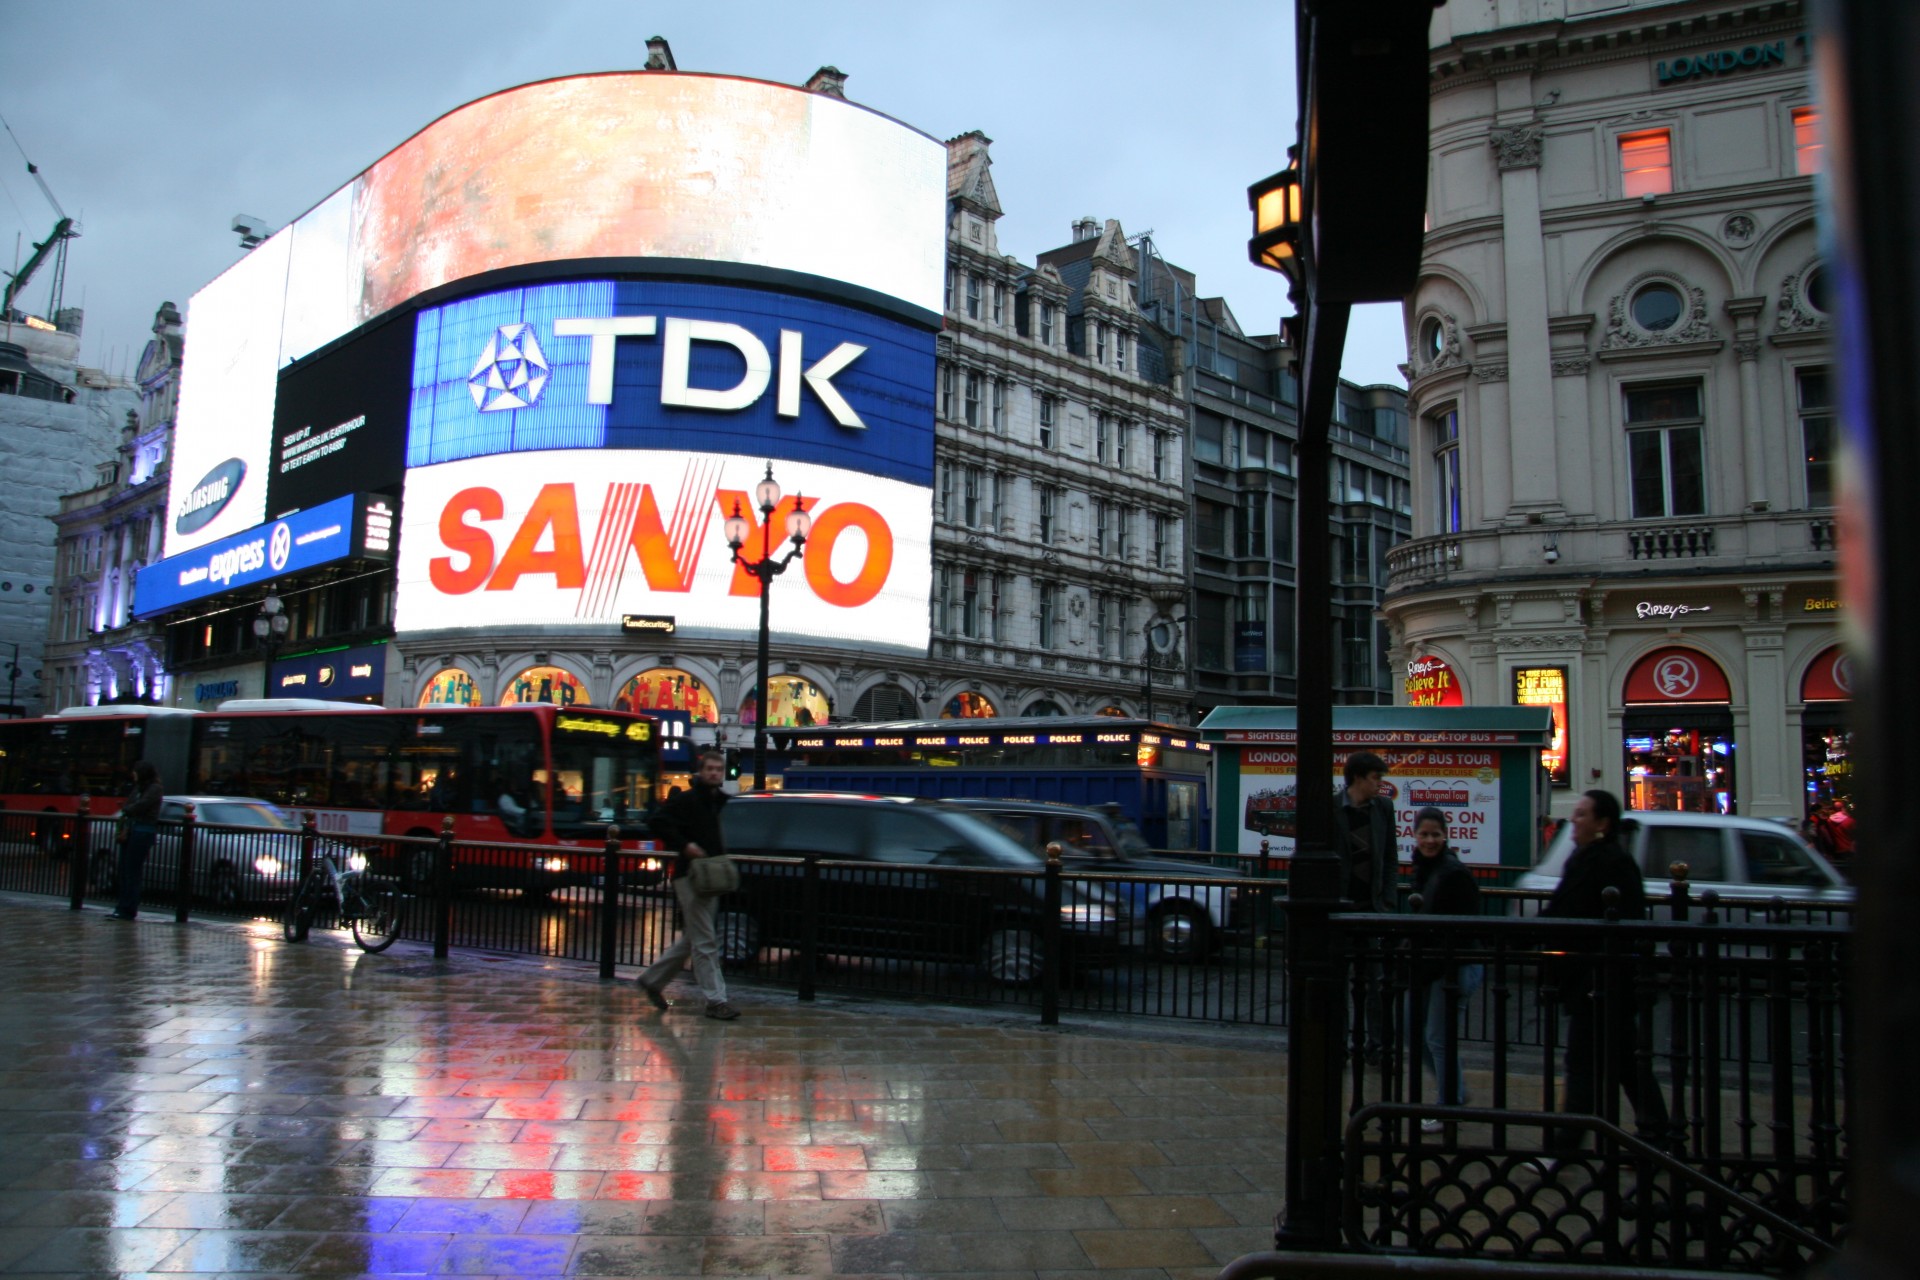 london piccadilly circus free photo